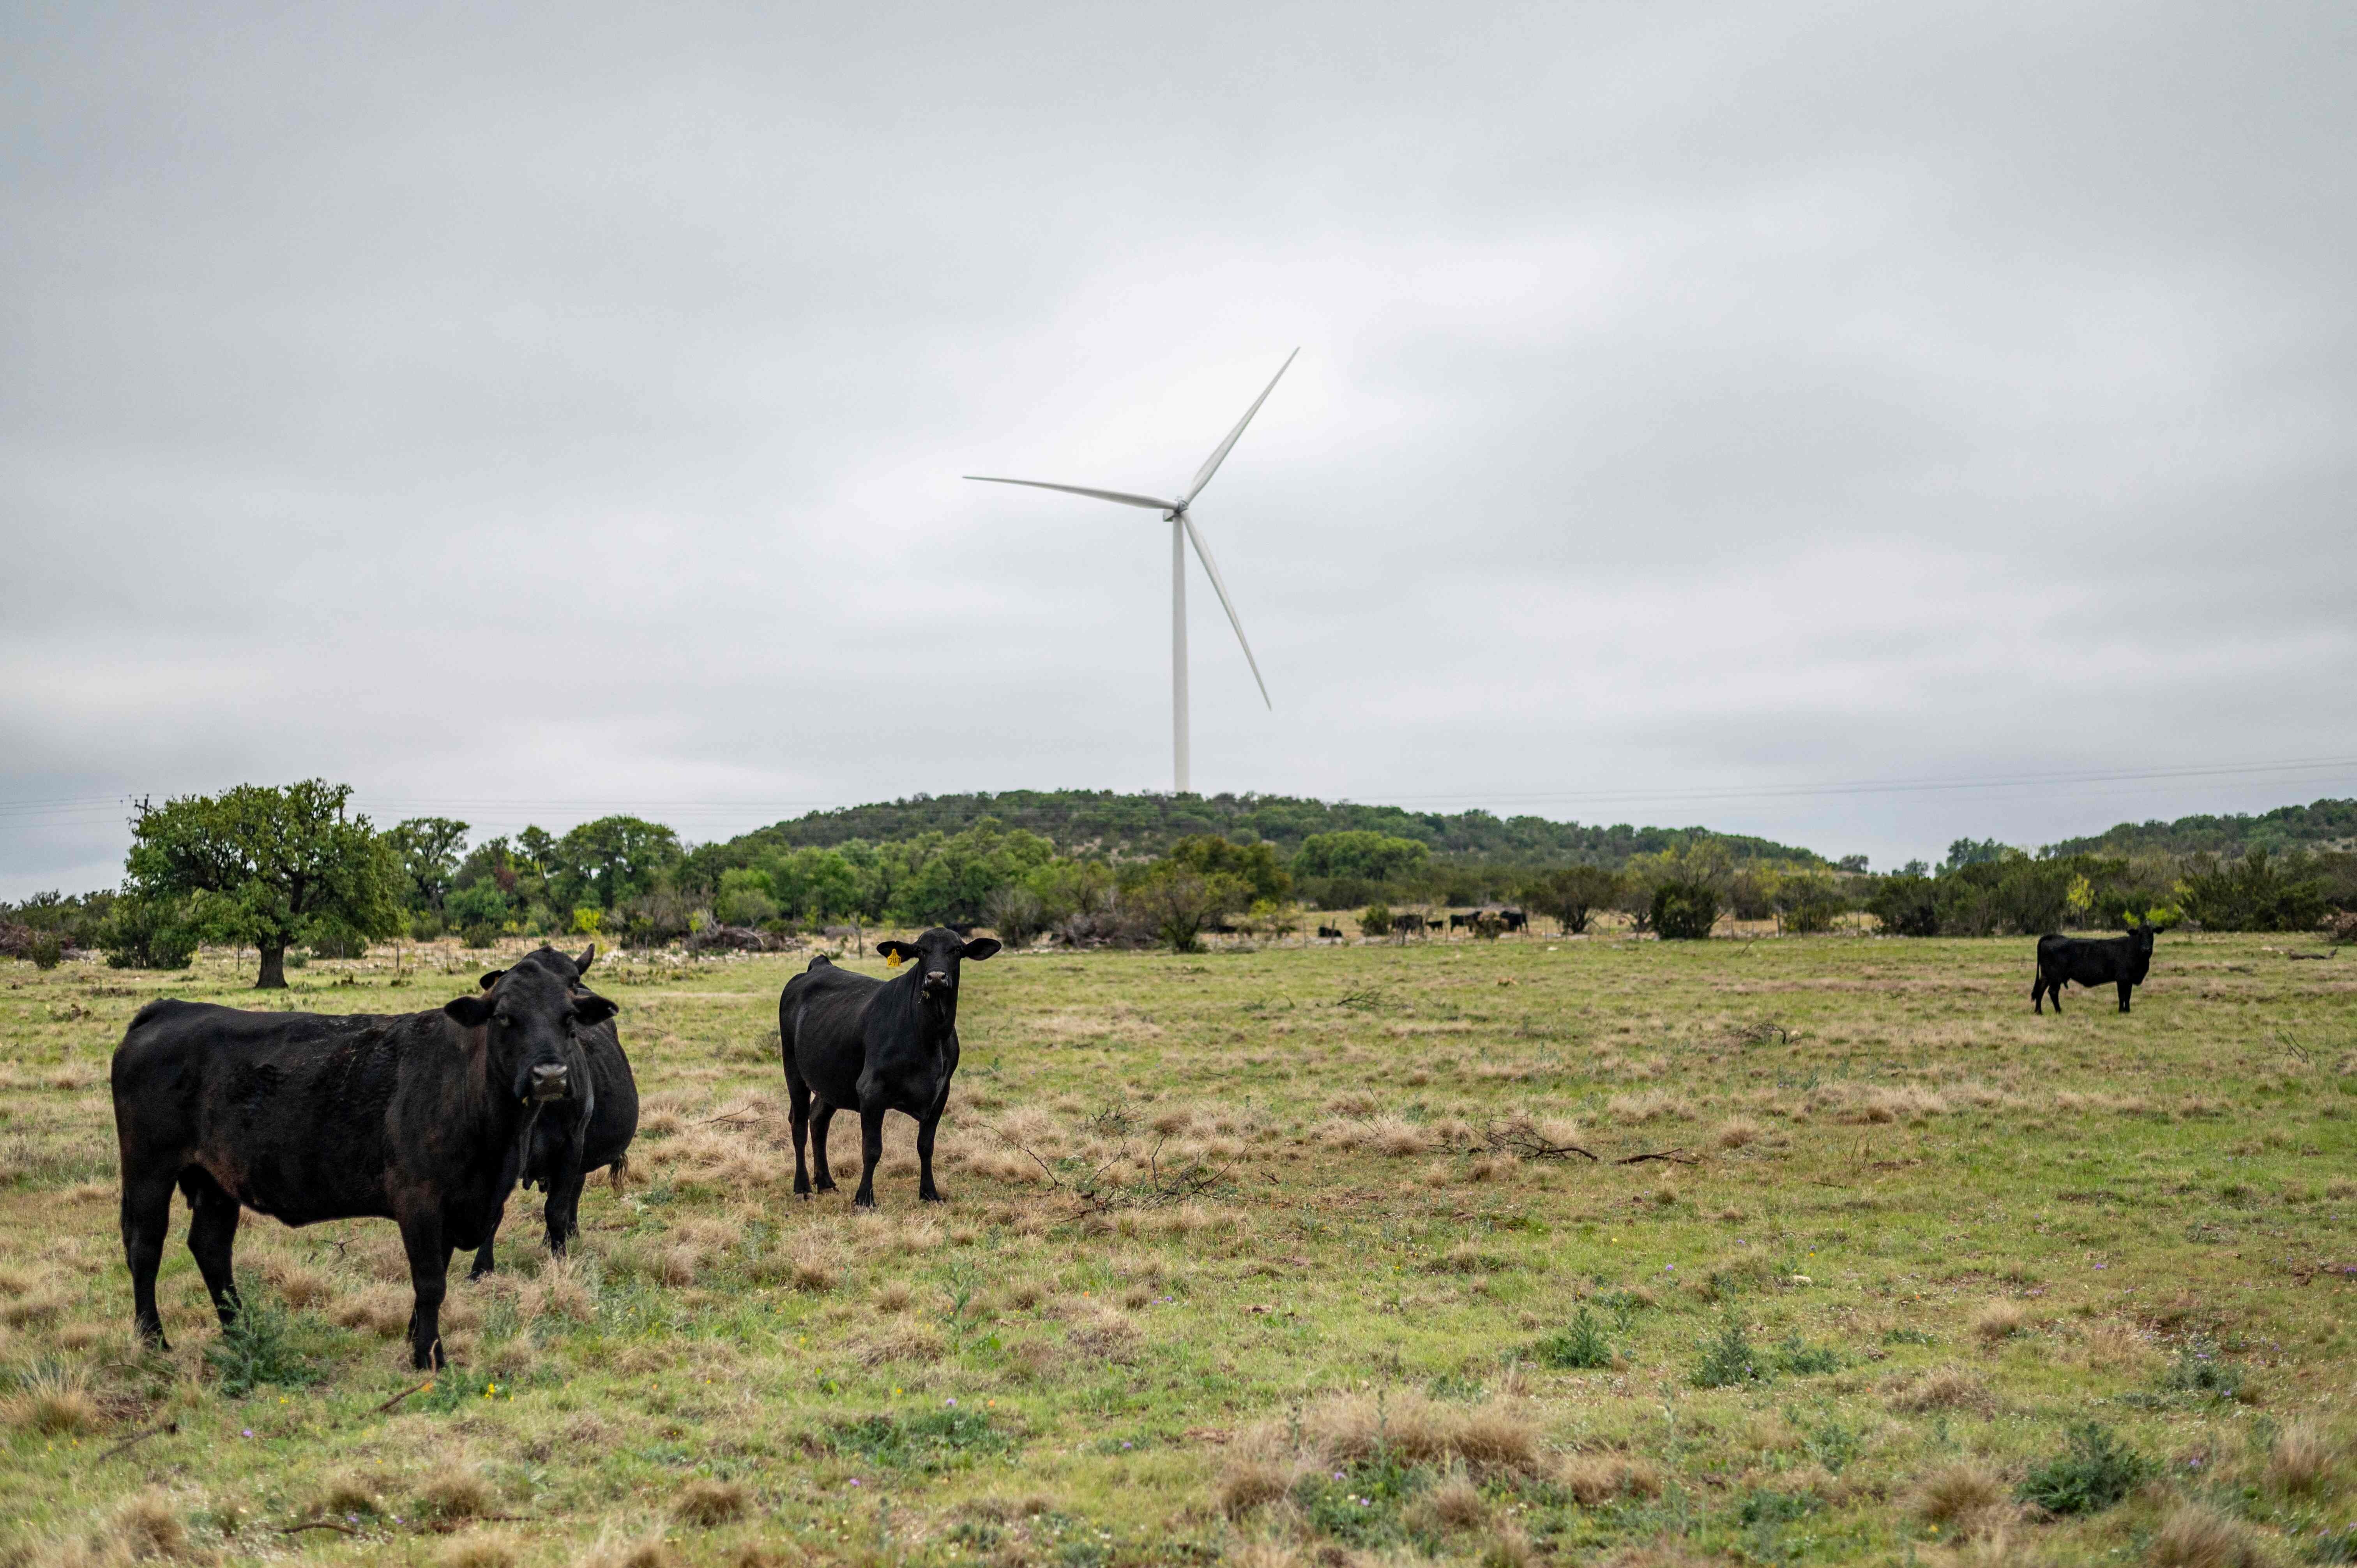 Cows roam near one of six newly installed wind turbines on a ranch in Eldorado, Texas, on April 16. Cattle rancher Bob Helmers, who for decades hosted oil wells on his ranch, recently plugged the pumps and allowed a utility company to build the wind turbines, making the shift to wind power. Photo: AFP